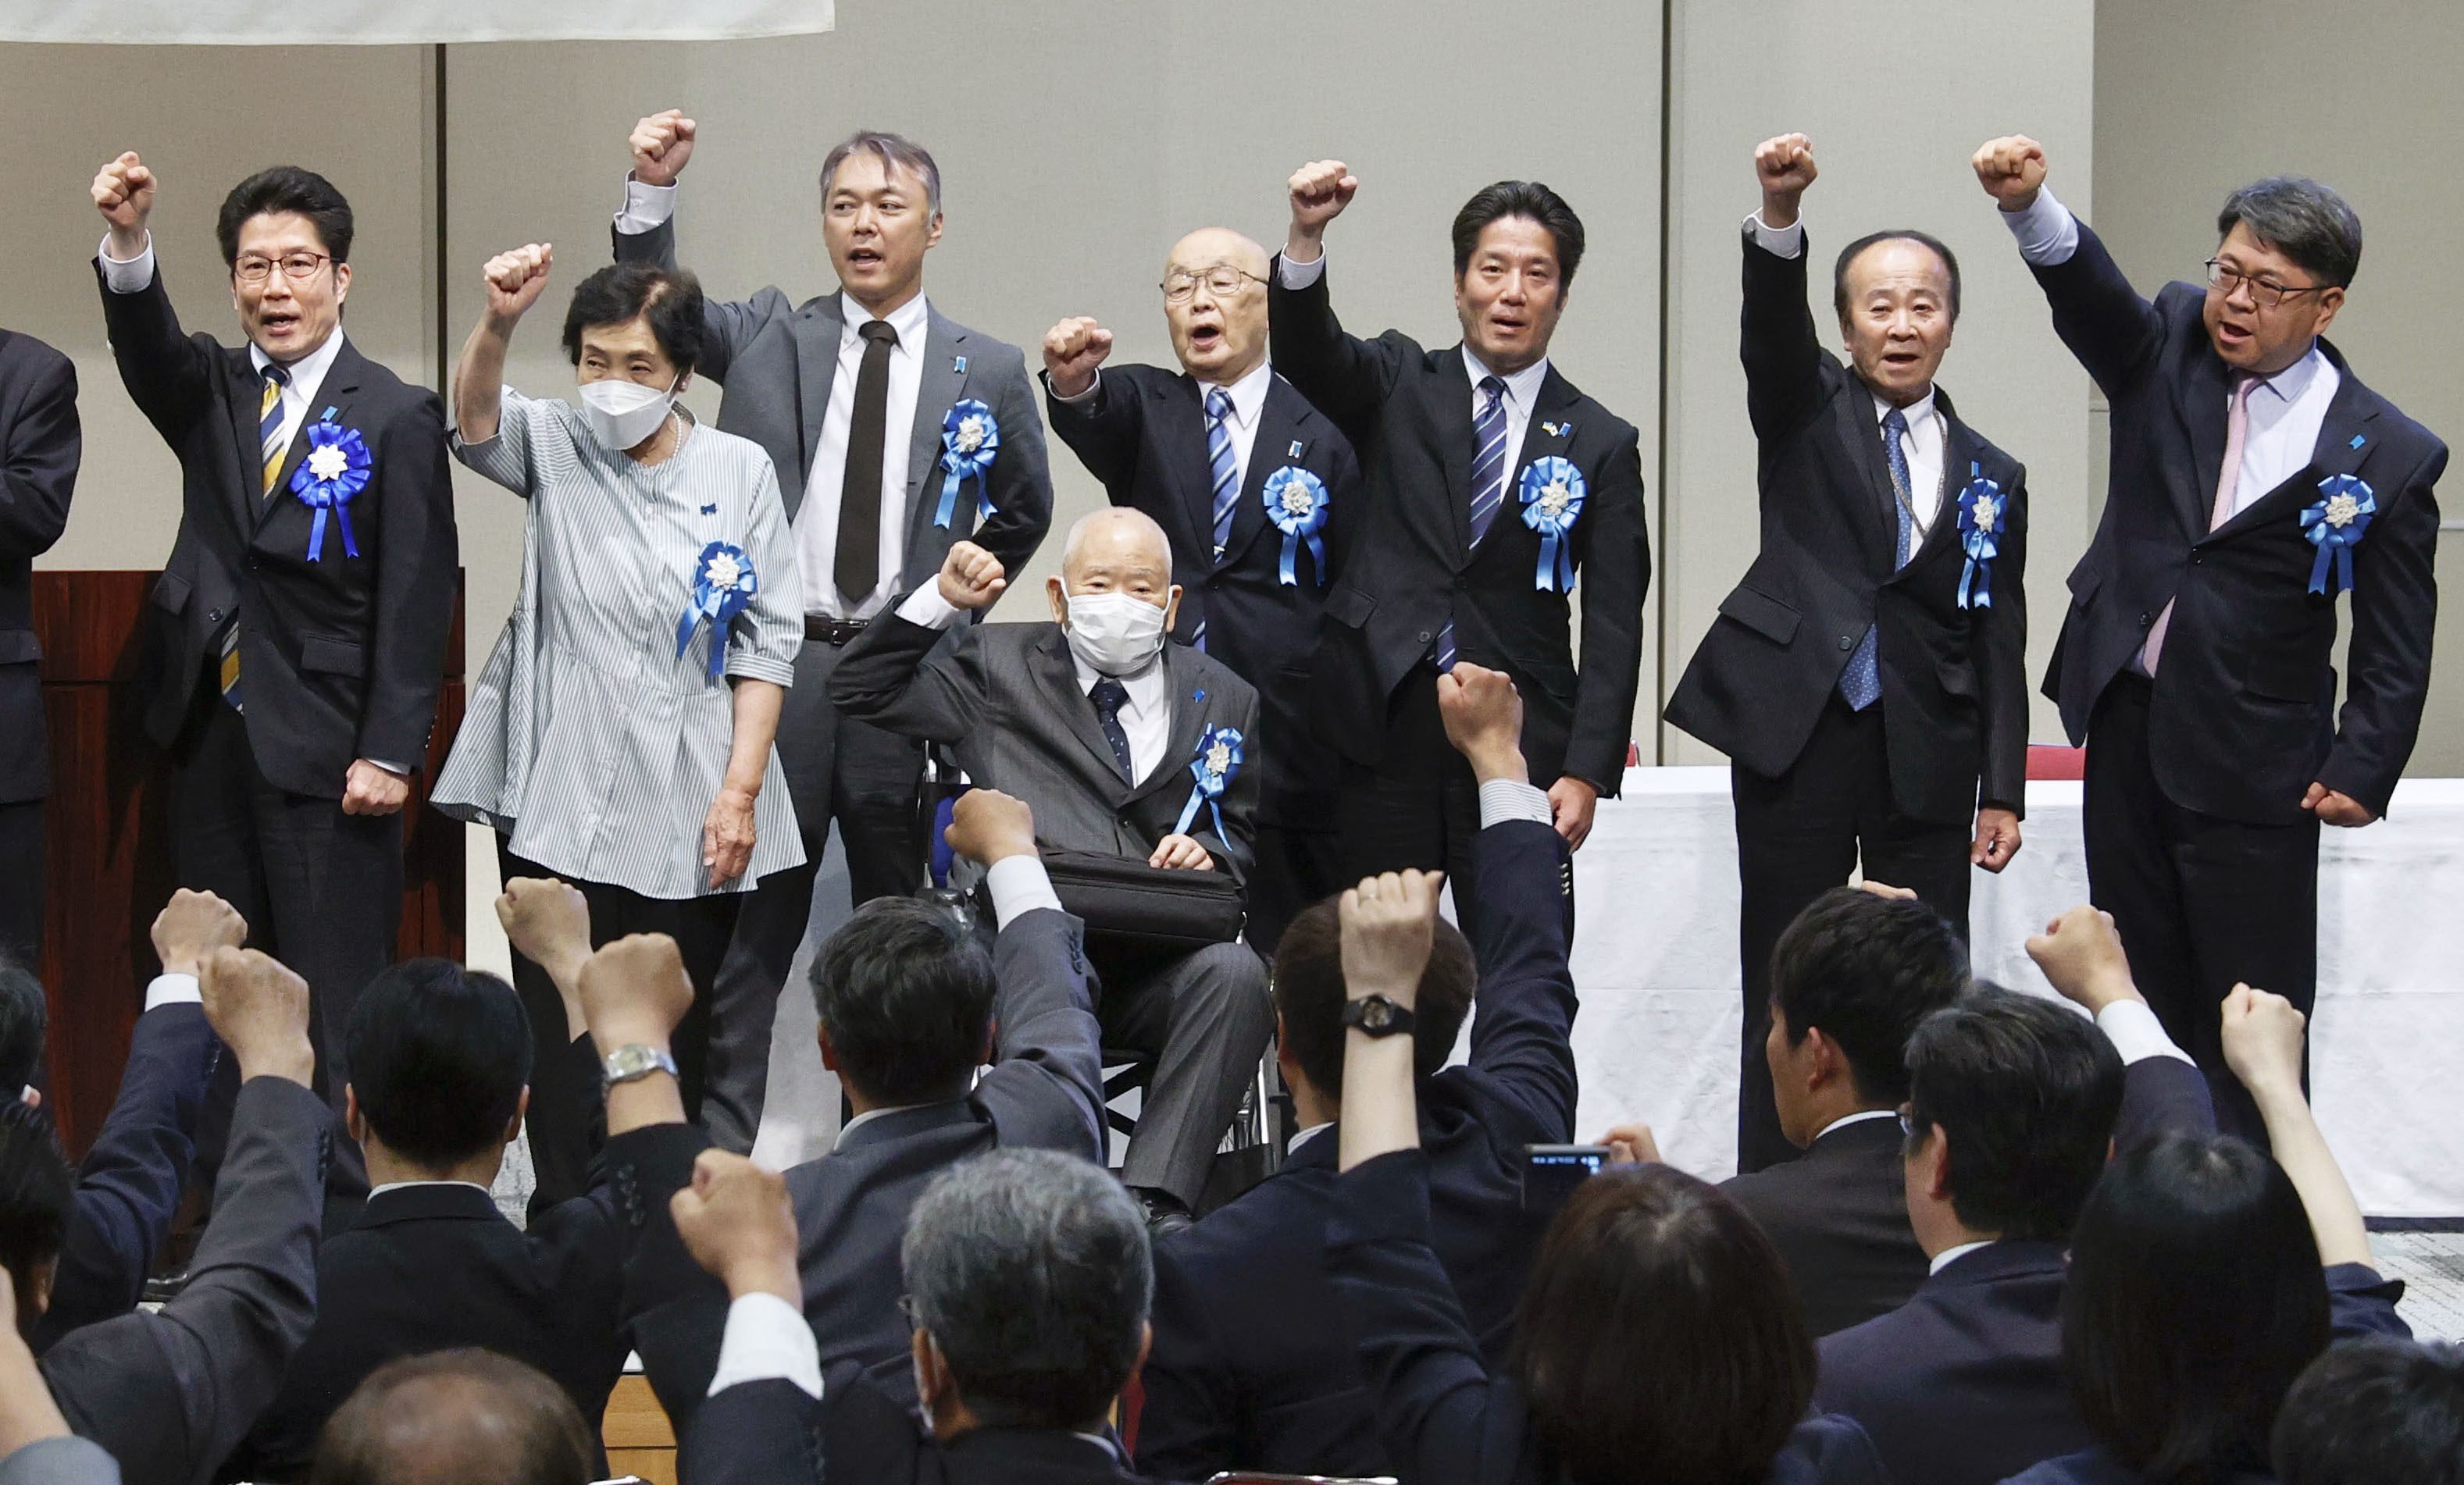 Families of Japanese nationals abducted by North Korea in the 1970s and 1980s, and their supporters, stage a rally in Tokyo. Photo: Kyodo